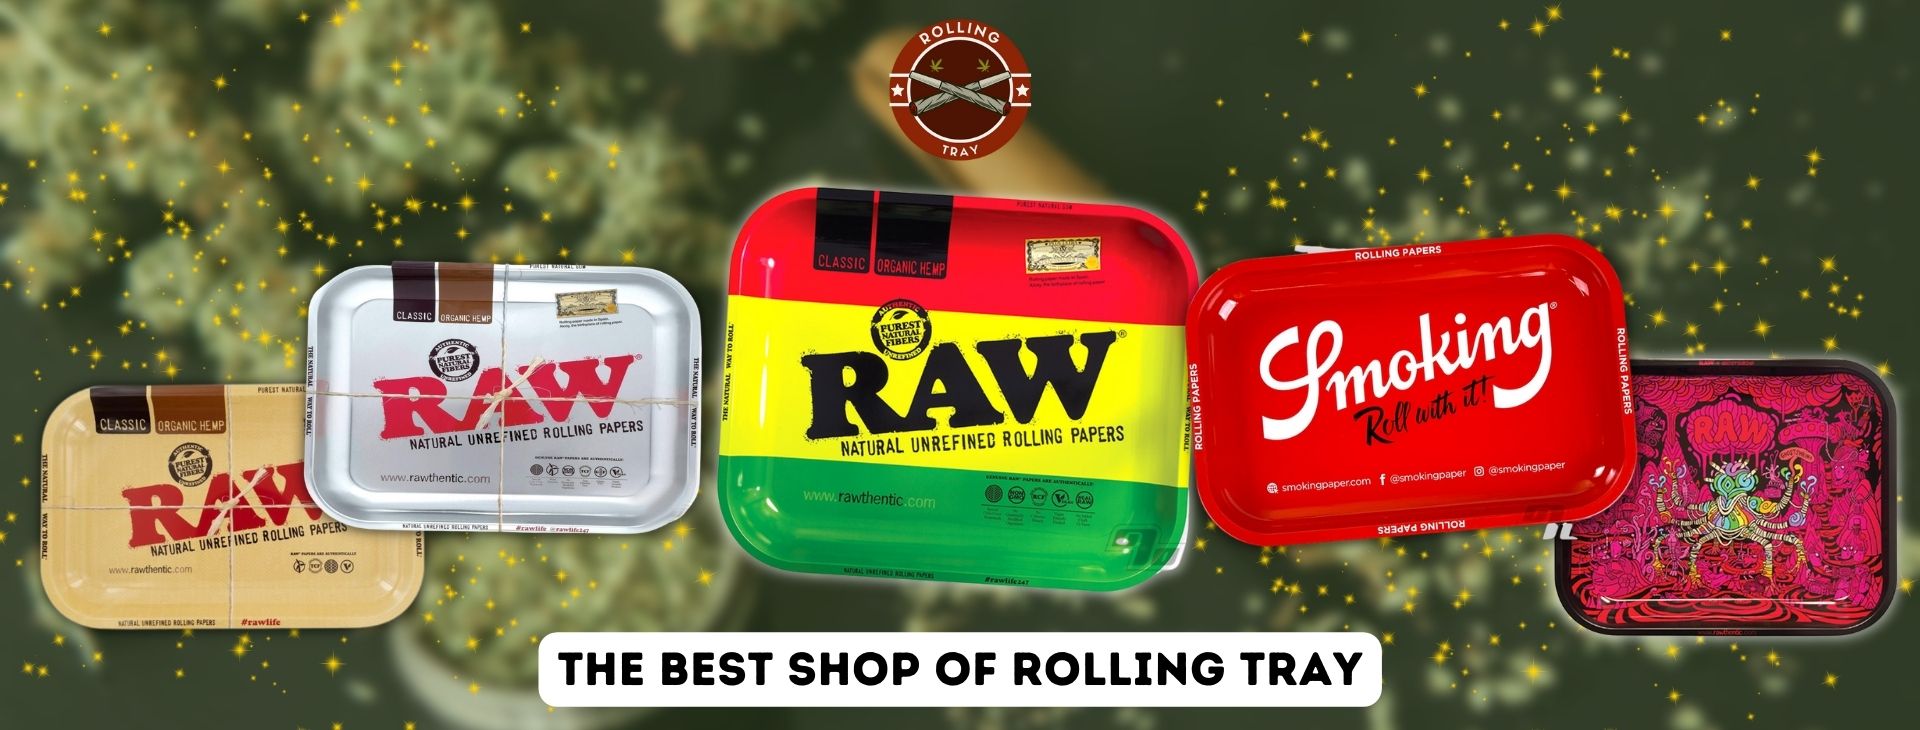 Rolling Tray Banner - Rolling Tray Shop